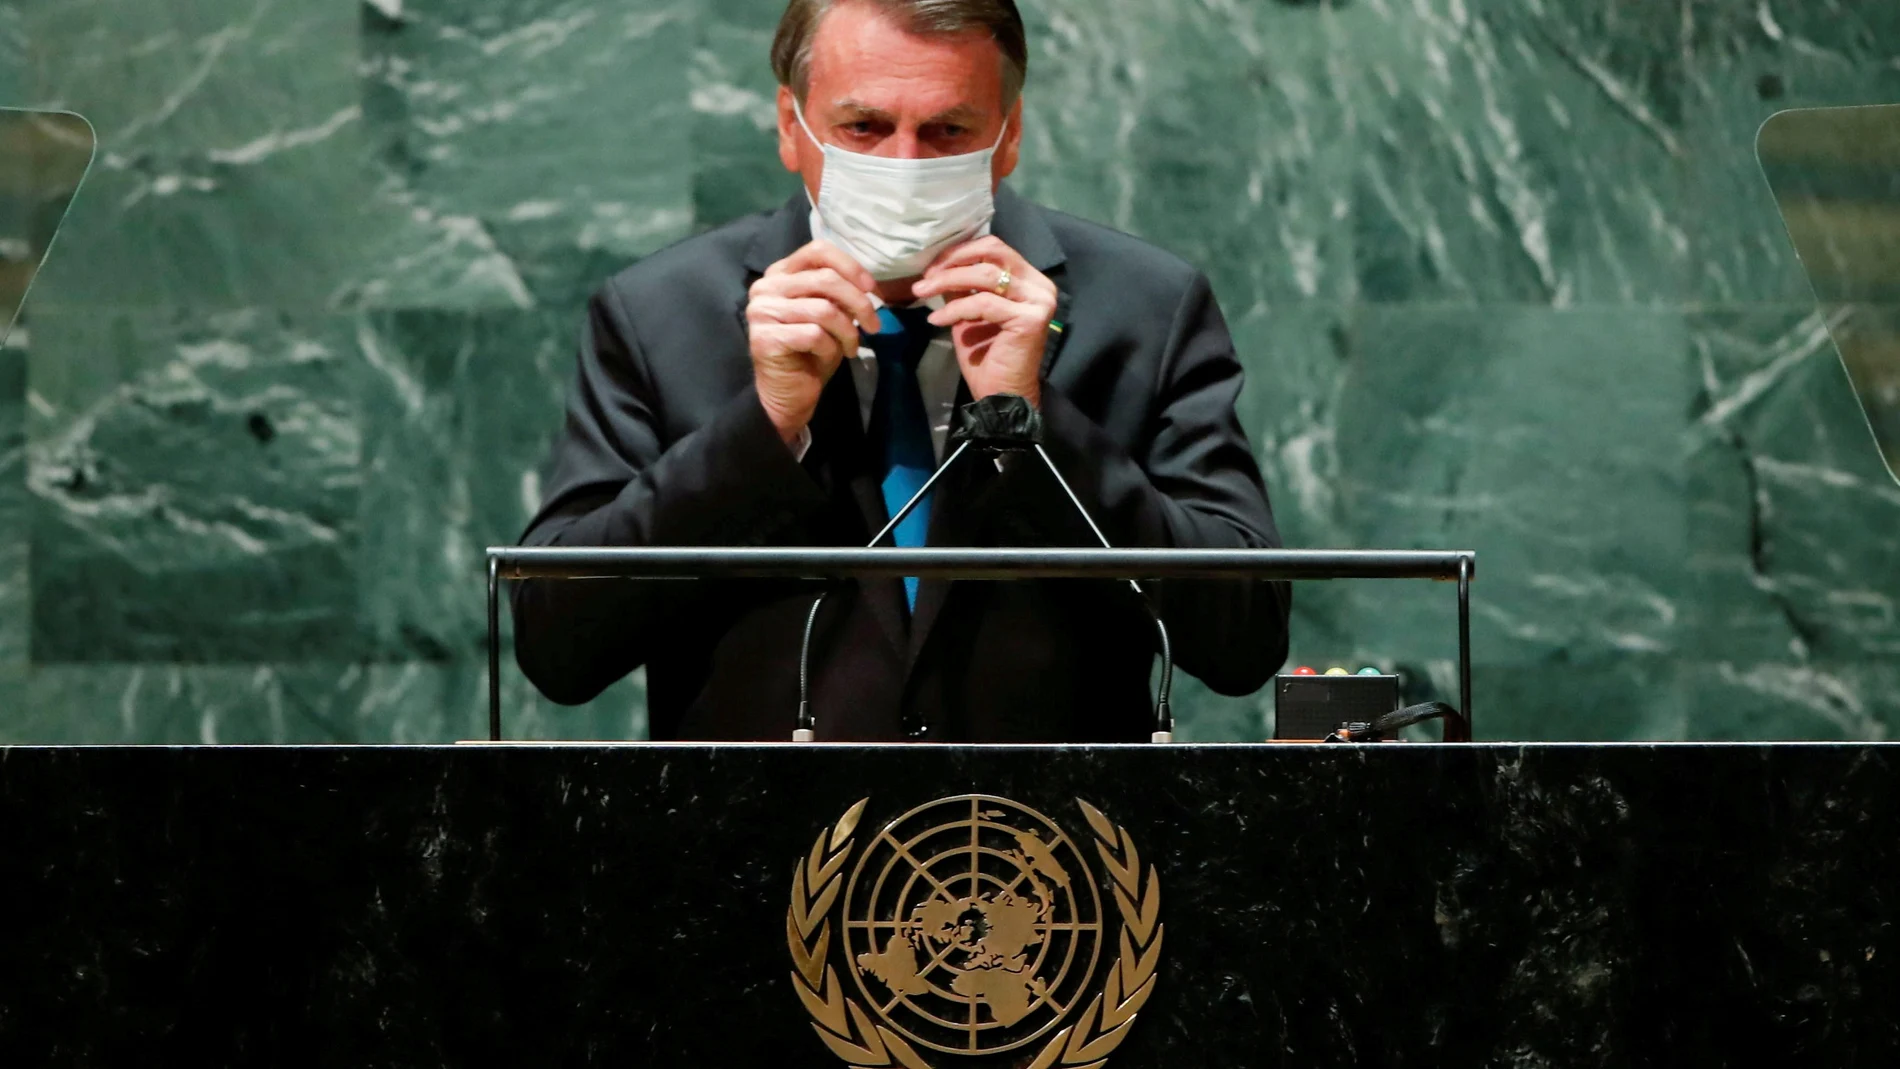 FILE PHOTO: Brazil's President Jair Bolsonaro puts back on a protective face mask worn due to the coronavirus disease (COVID-19) pandemic after speaking during the 76th Session of the U.N. General Assembly in New York City, U.S., September 21, 2021. REUTERS/Eduardo Munoz/Pool/File Photo